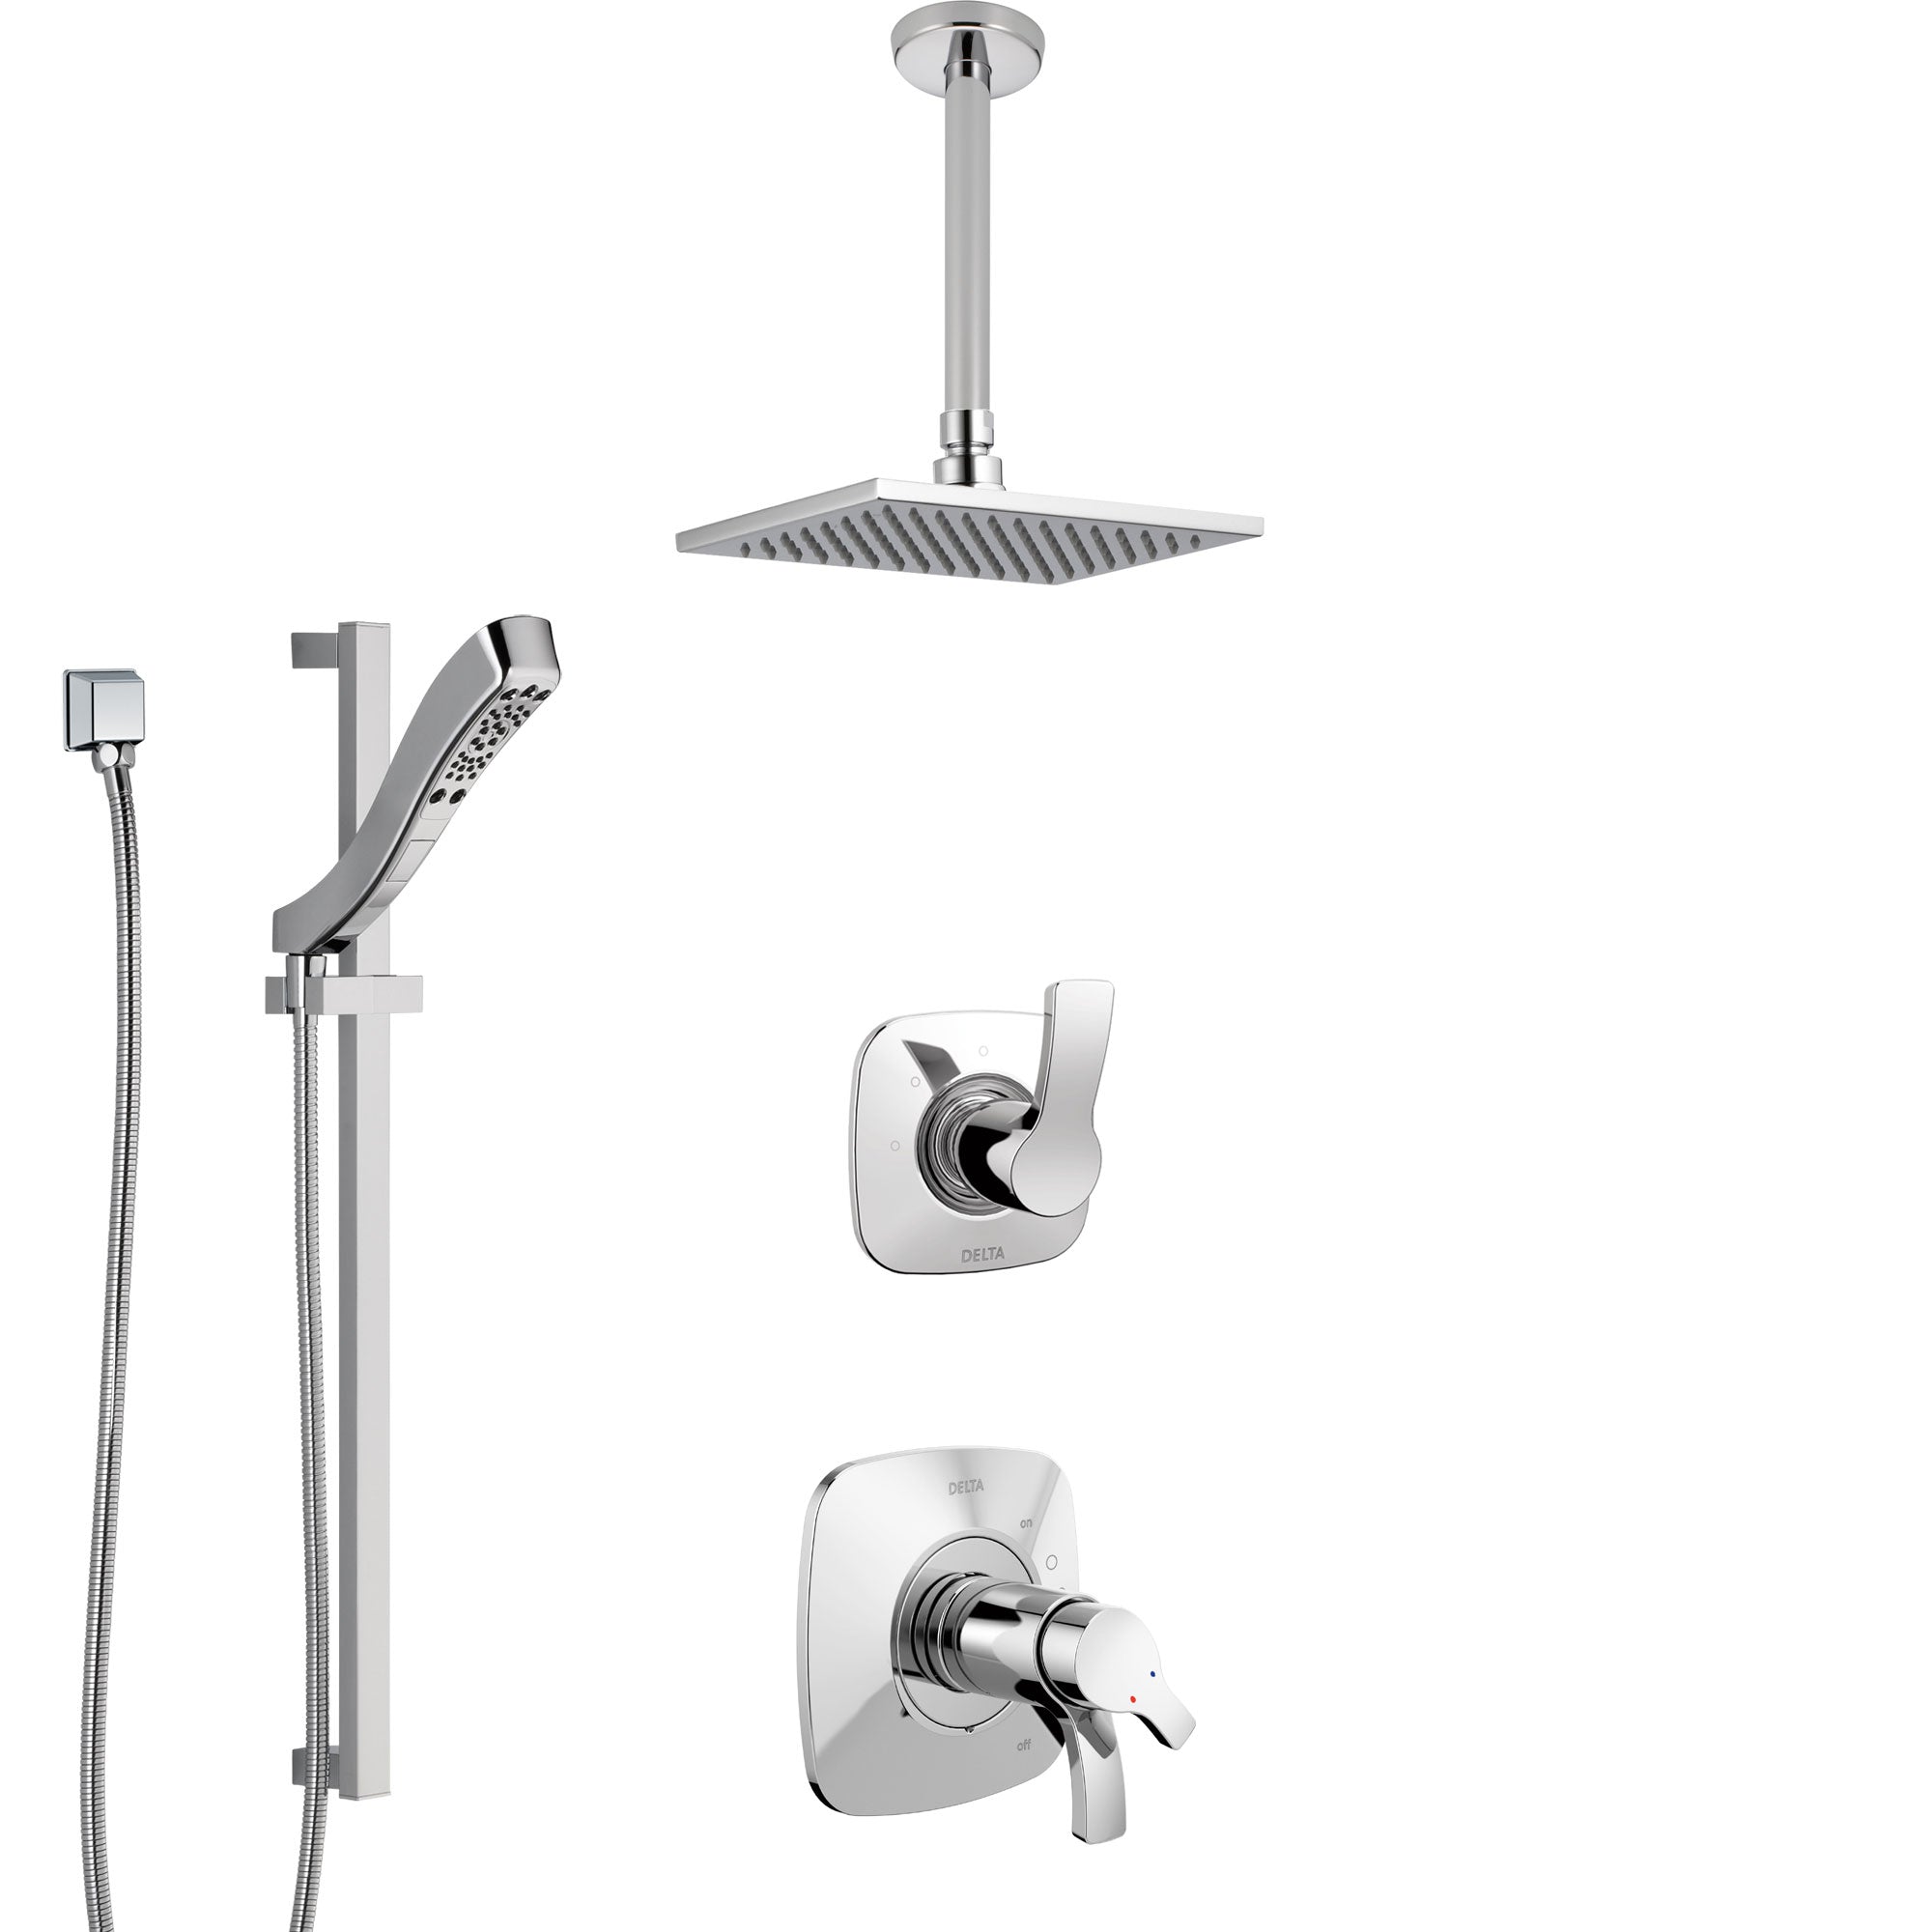 Delta Tesla Chrome Finish Shower System with Dual Thermostatic Control Handle, Diverter, Ceiling Mount Showerhead, and Hand Shower SS17T5222